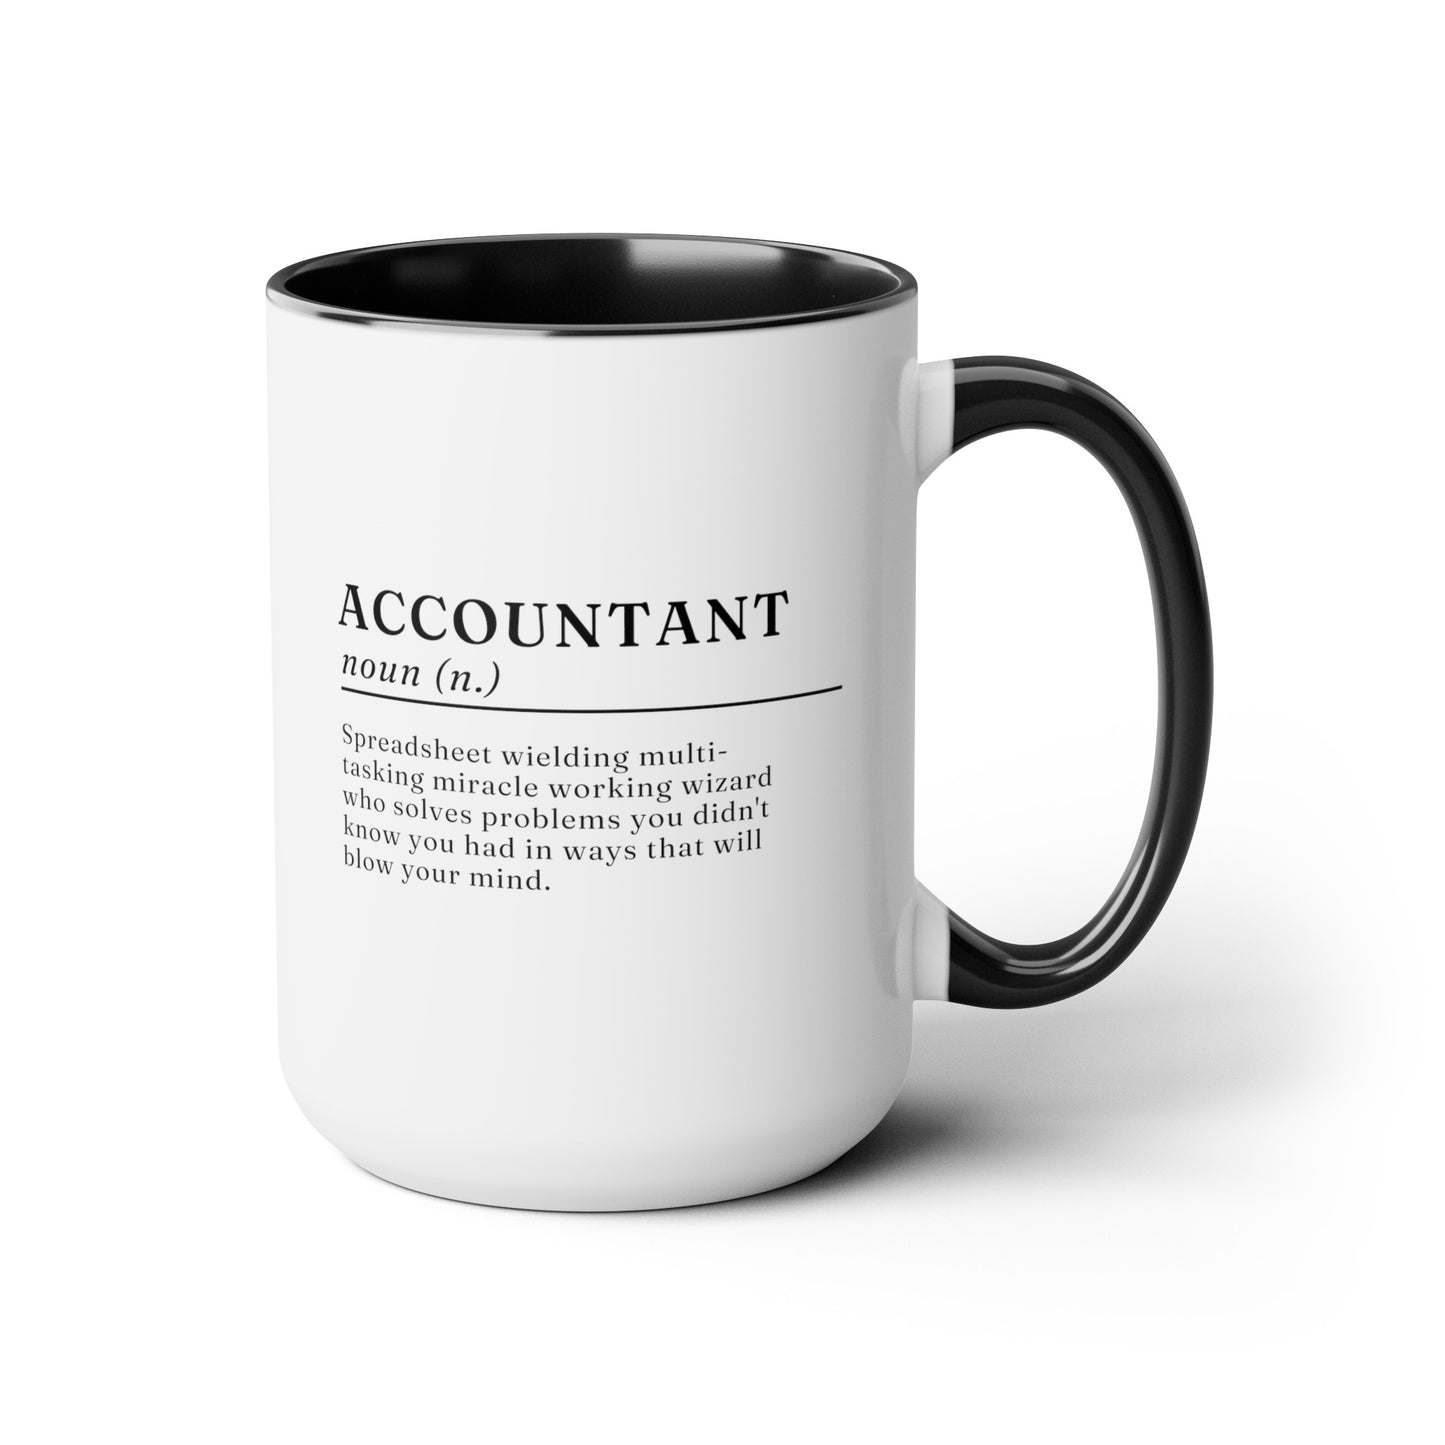 Accountant Definition 15oz white with black accent funny large coffee mug gift for accounting finance spreadsheet meaning waveywares wavey wares wavywares wavy wares